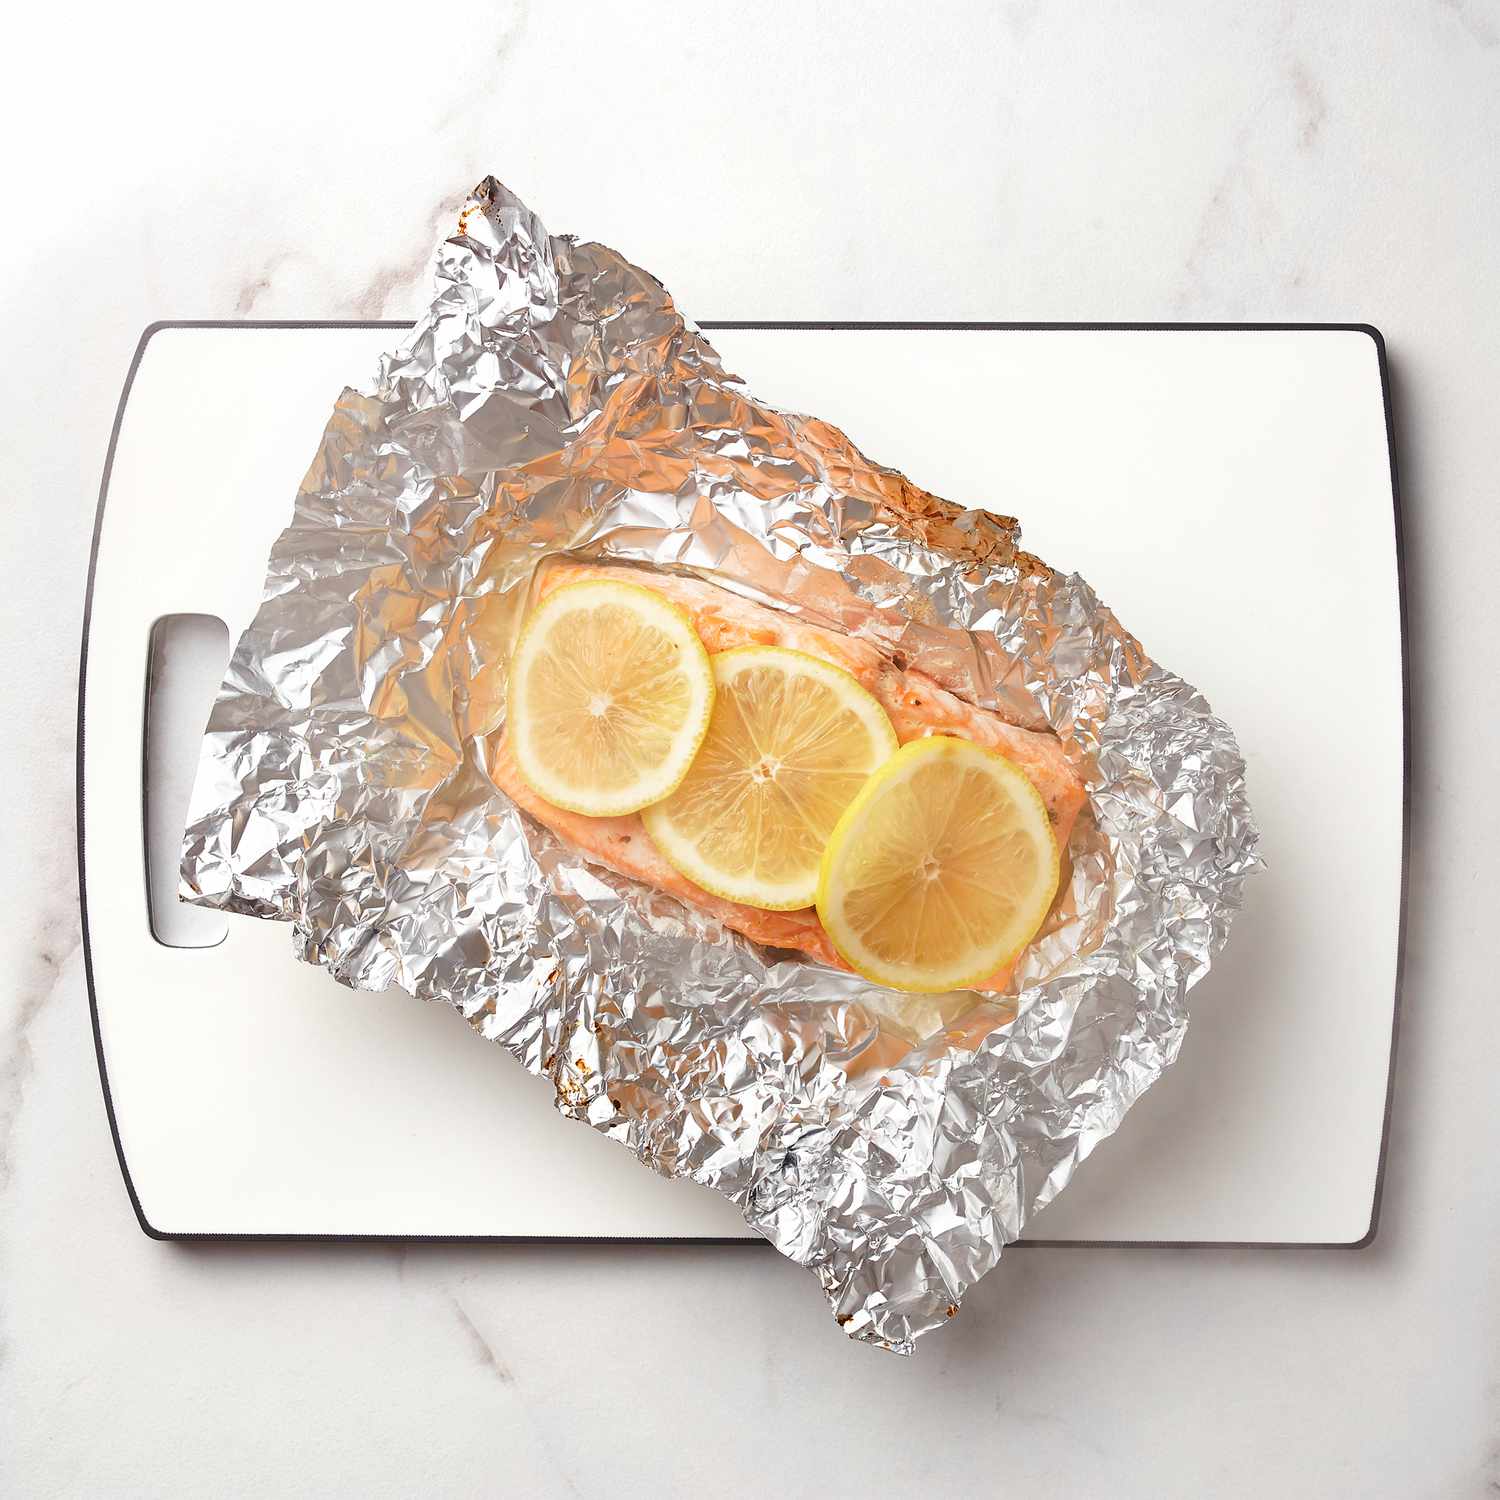 a steamed salmon fillet wrapped in tin foil